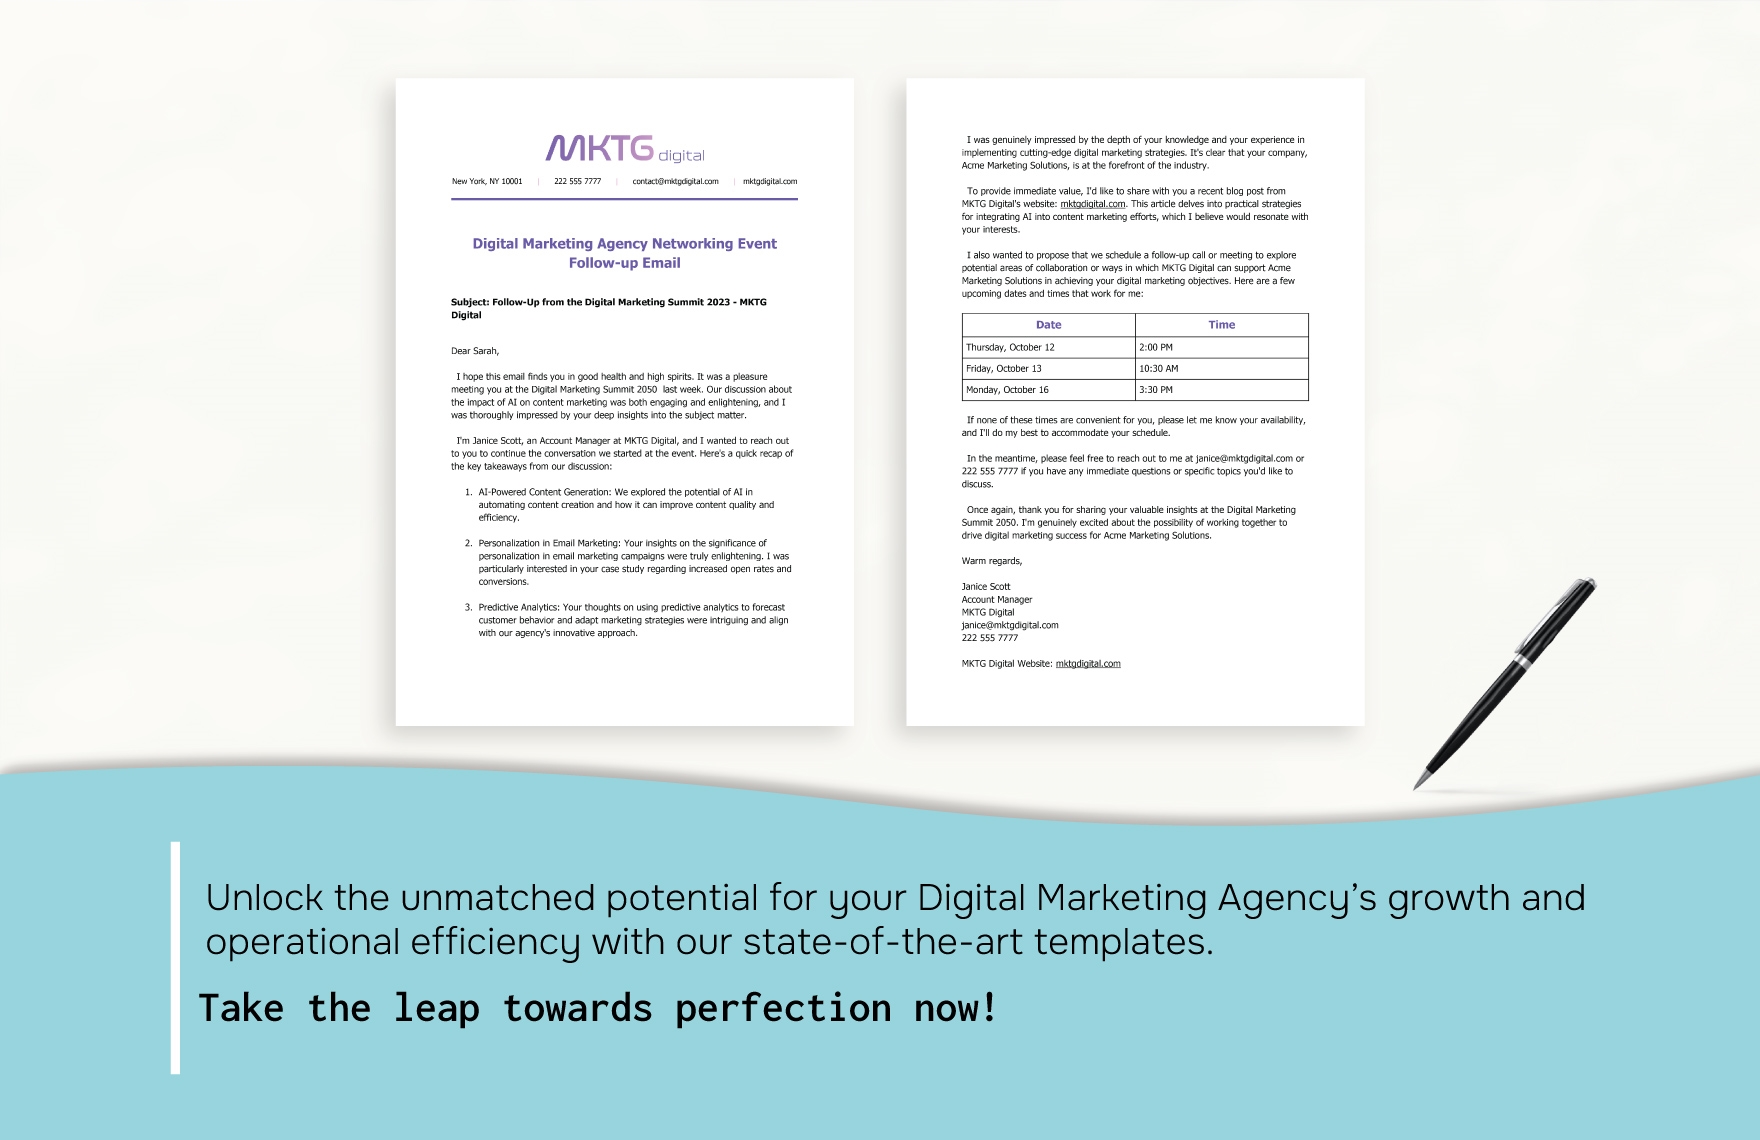 Digital Marketing Agency Networking Event Follow-up Email Template